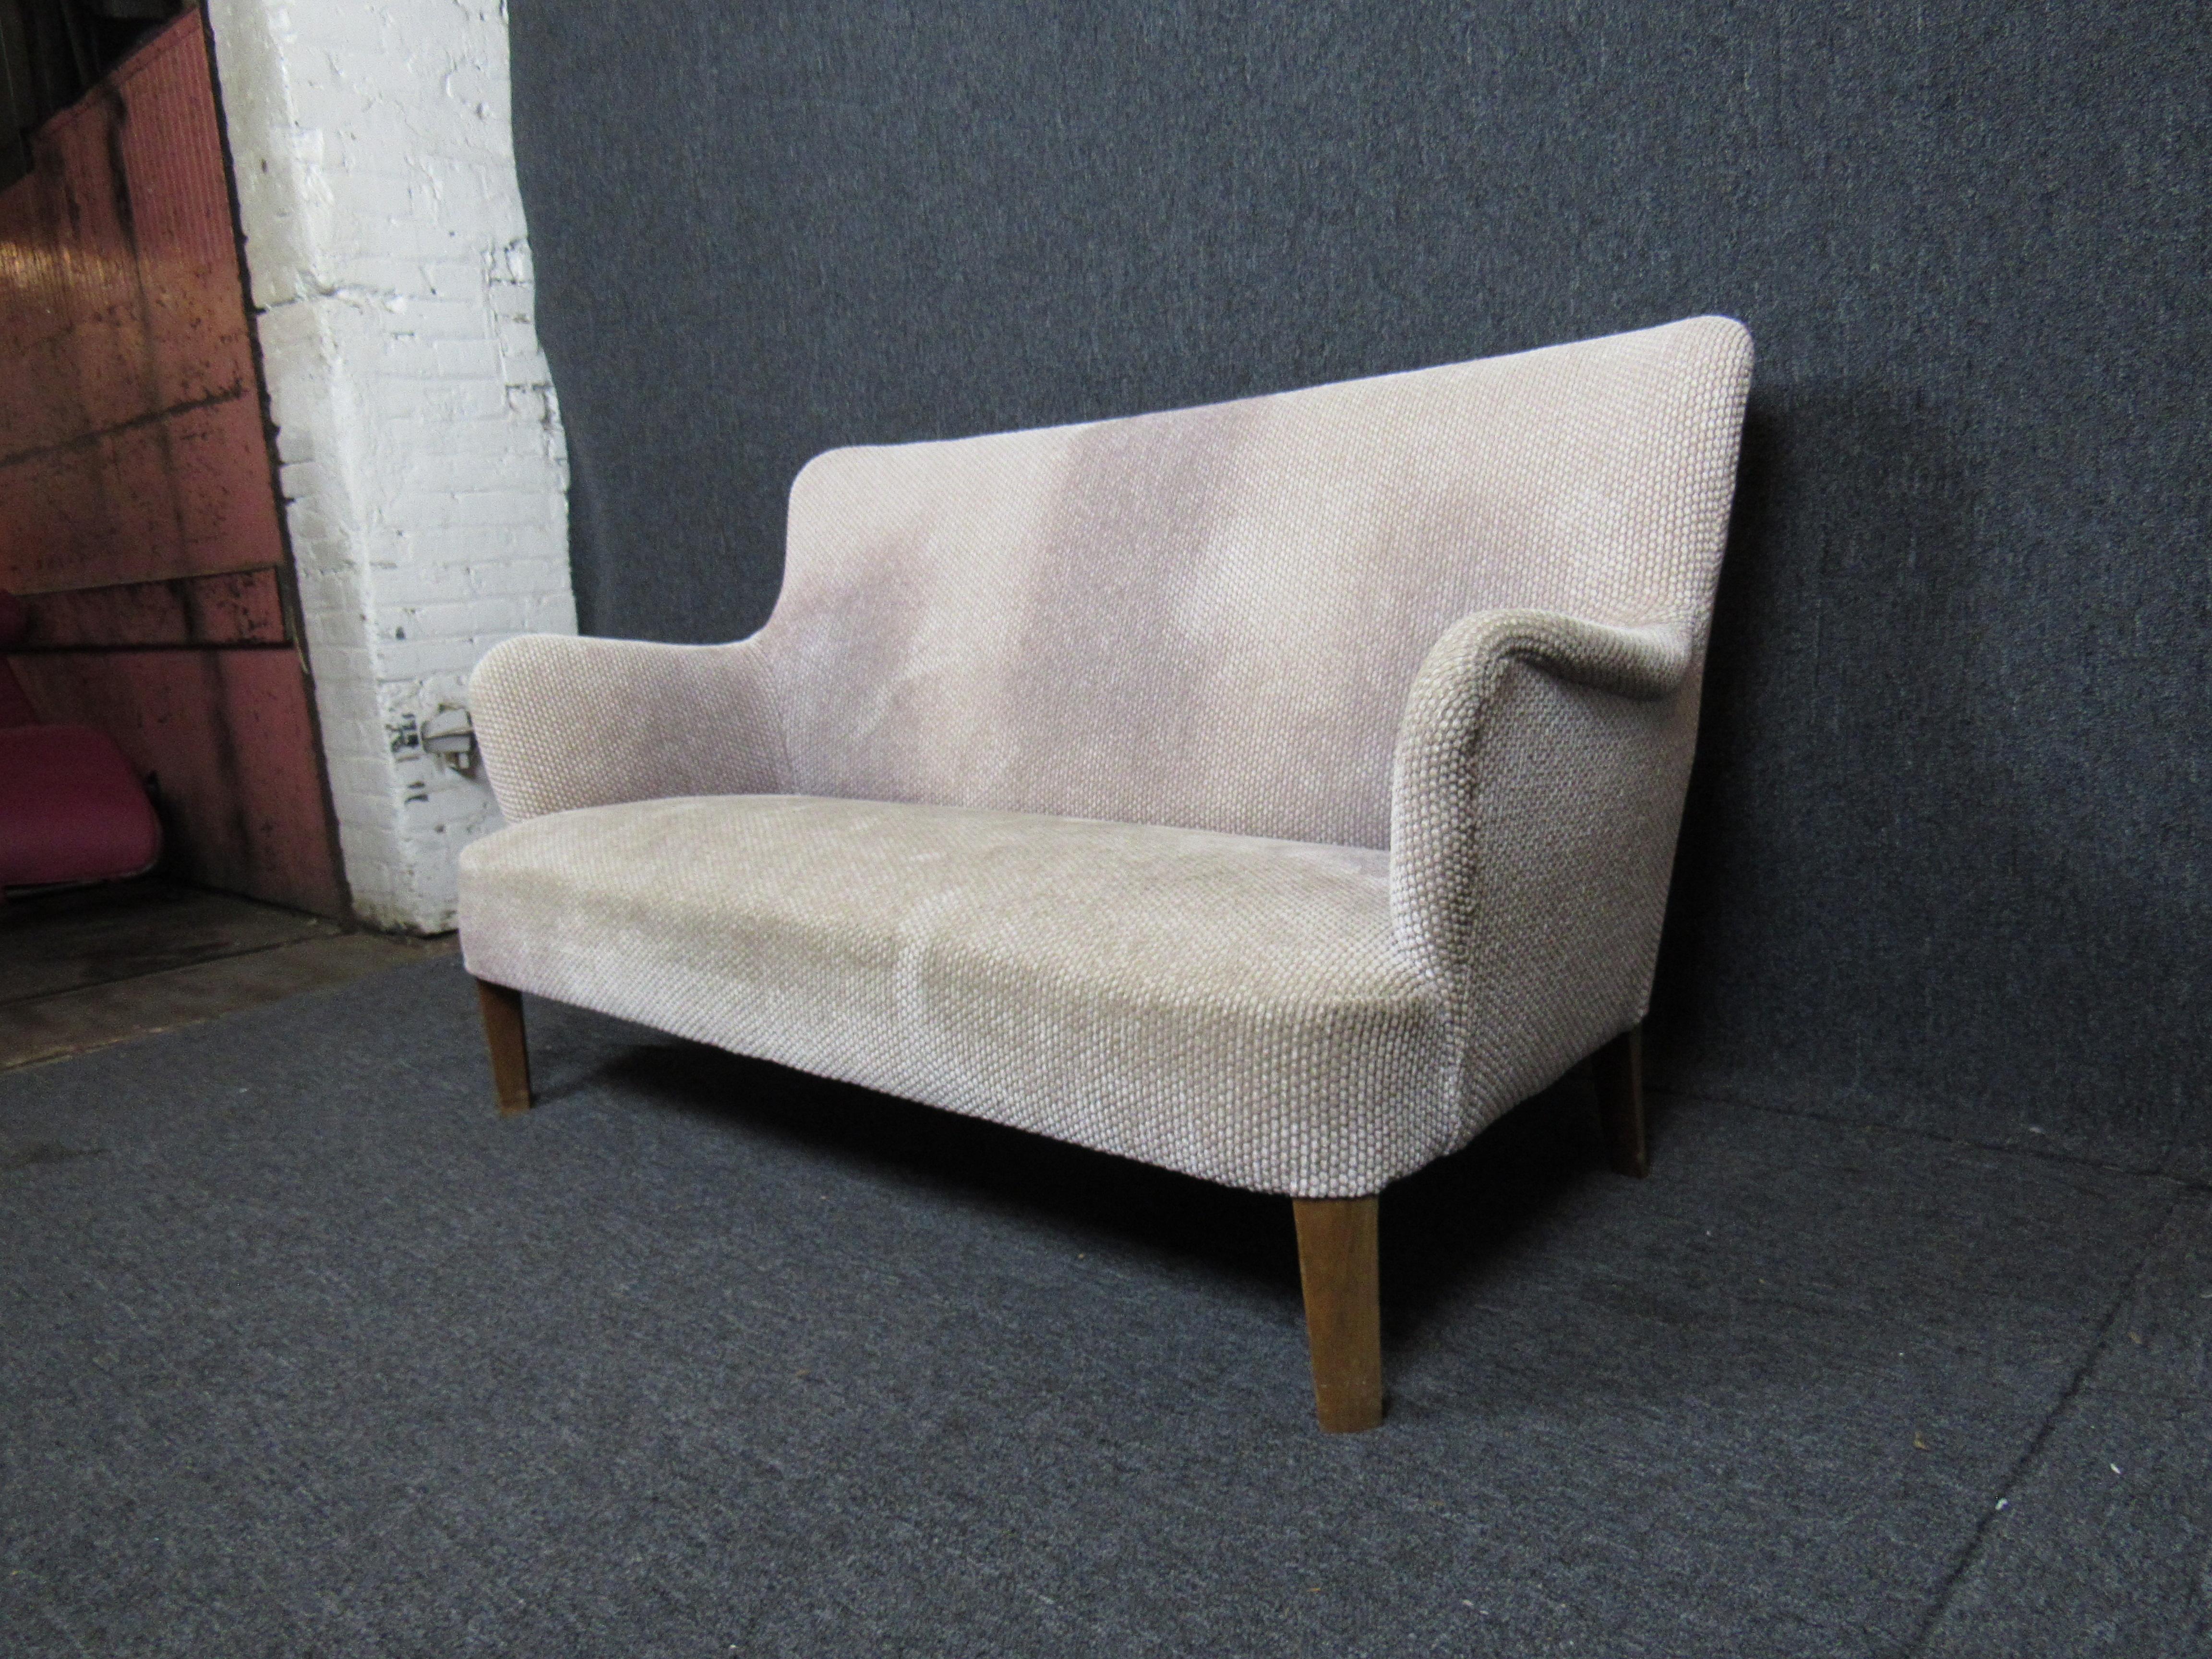 Stylish Mid-Century Modern Italian love seat in gray, featured on sturdy wood legs.

Please confirm location NY or NJ.